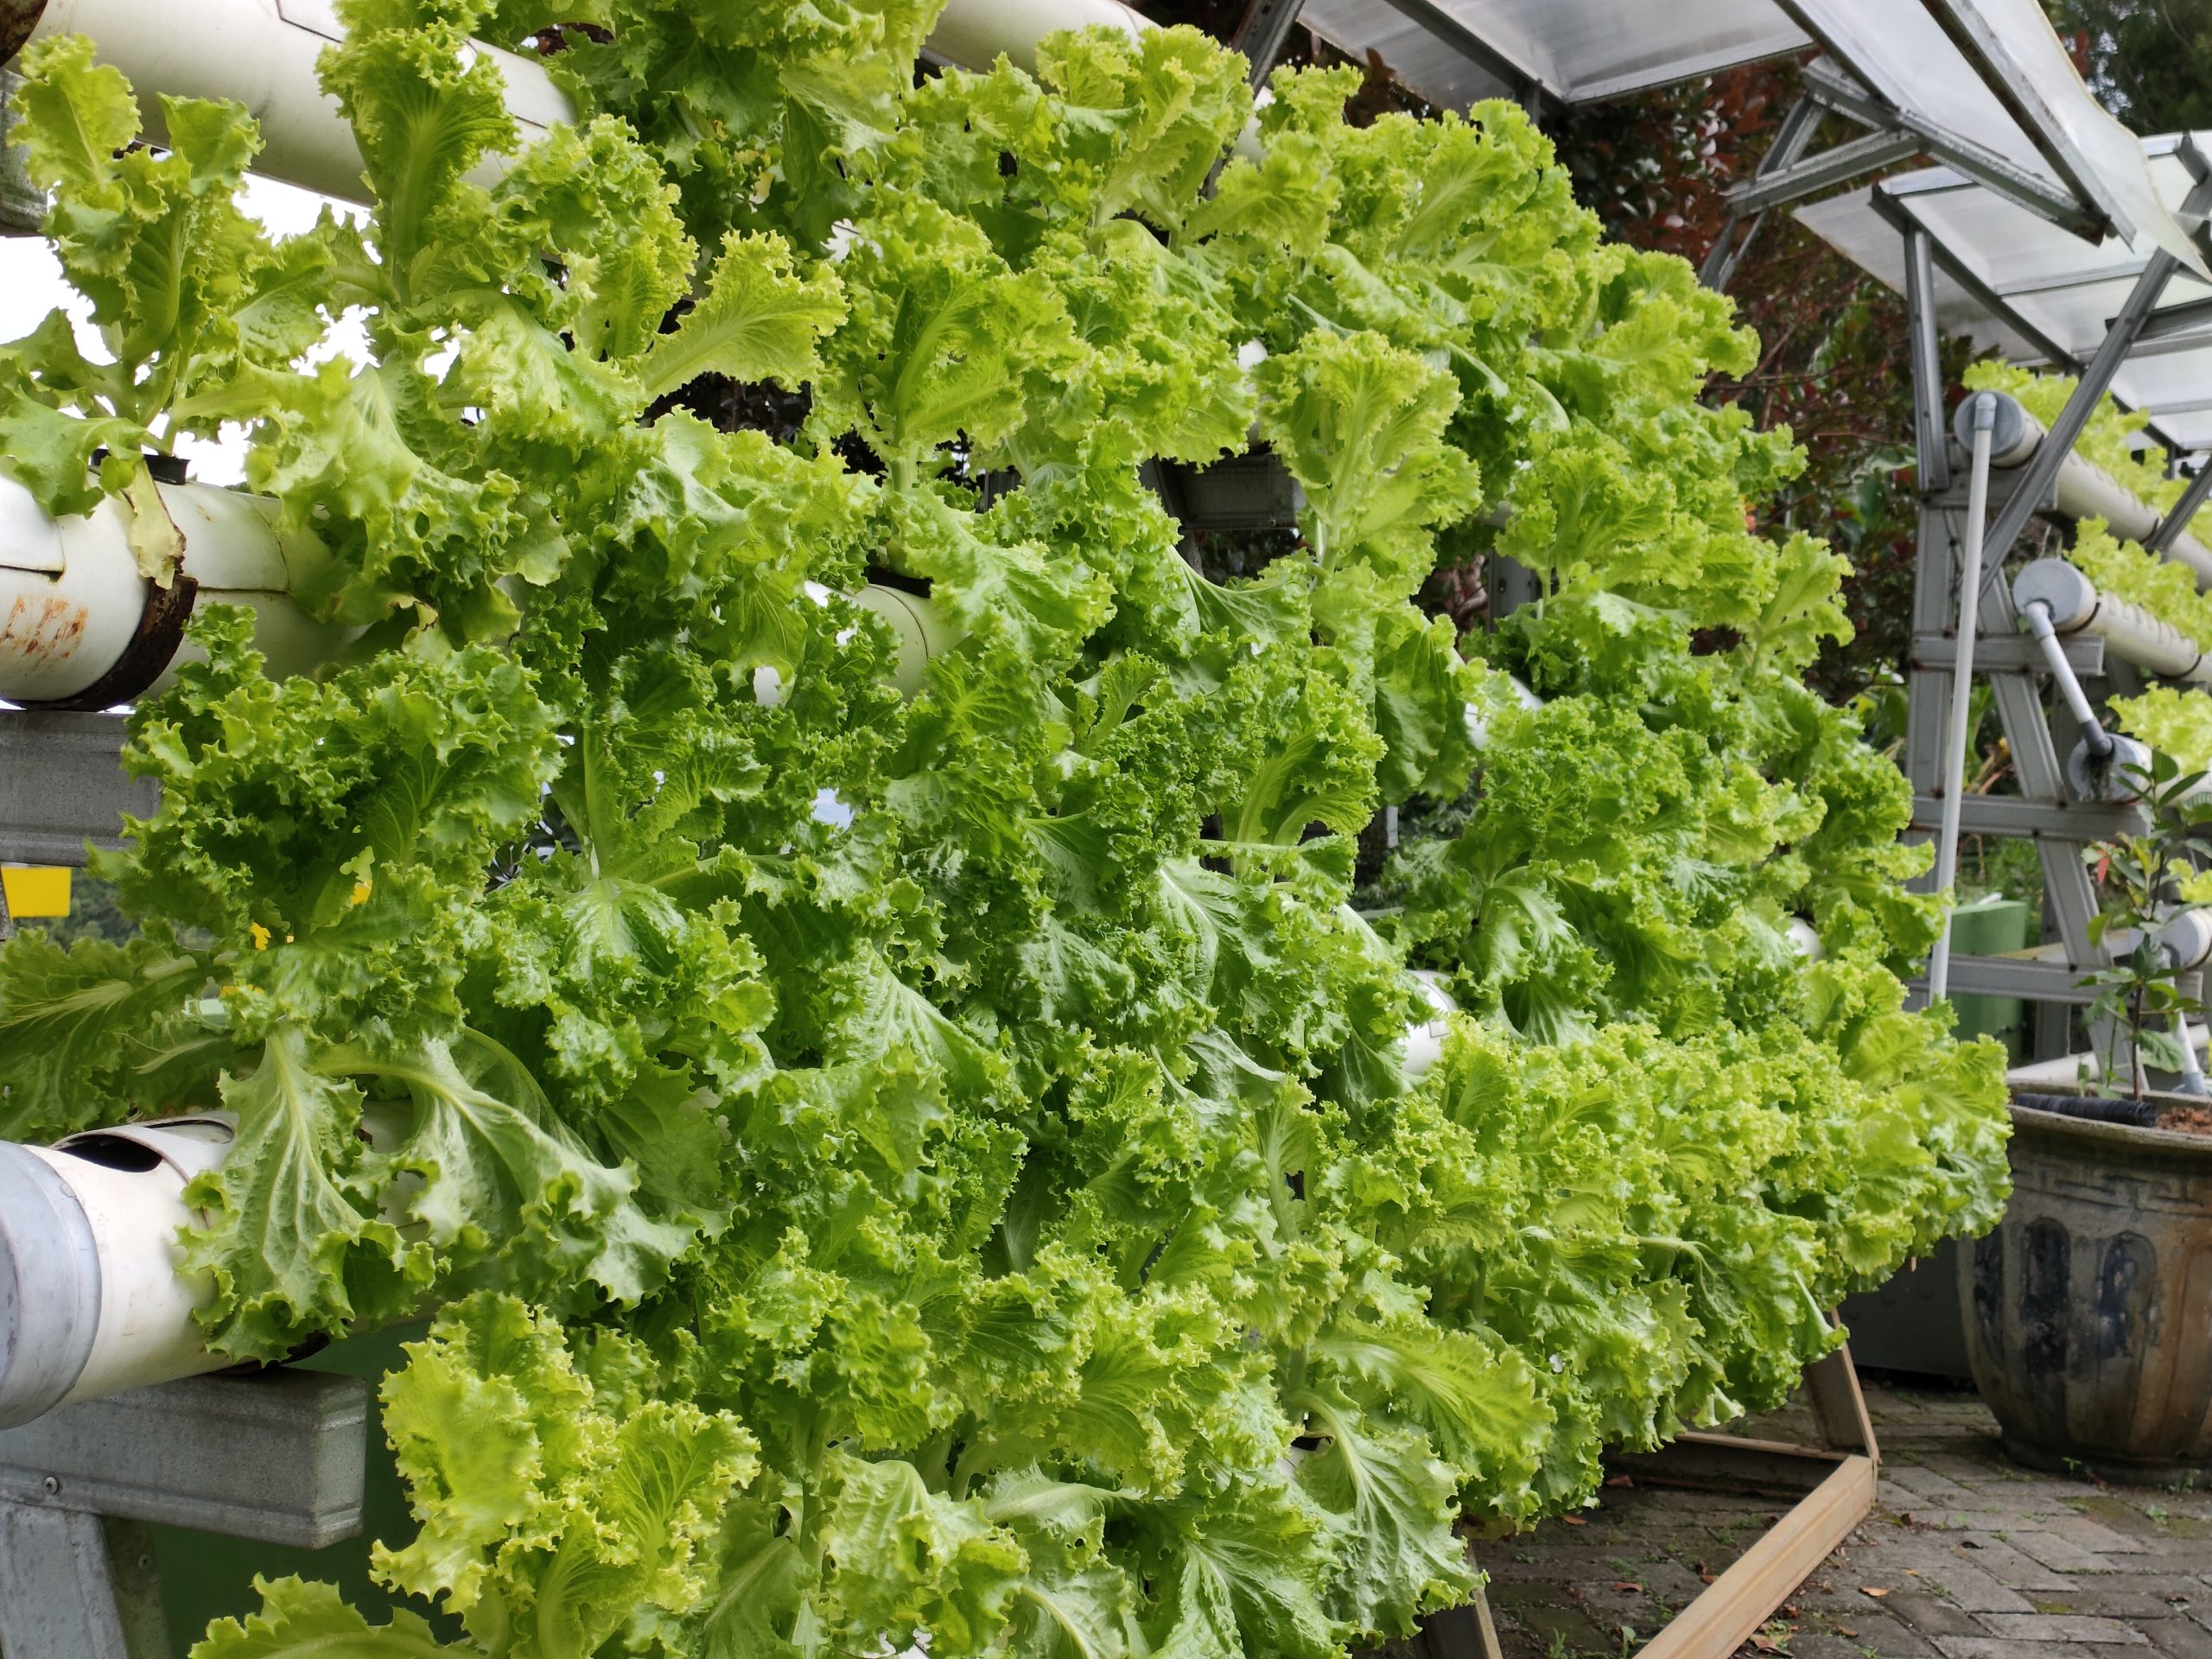 how do you take care of a hydroponic garden